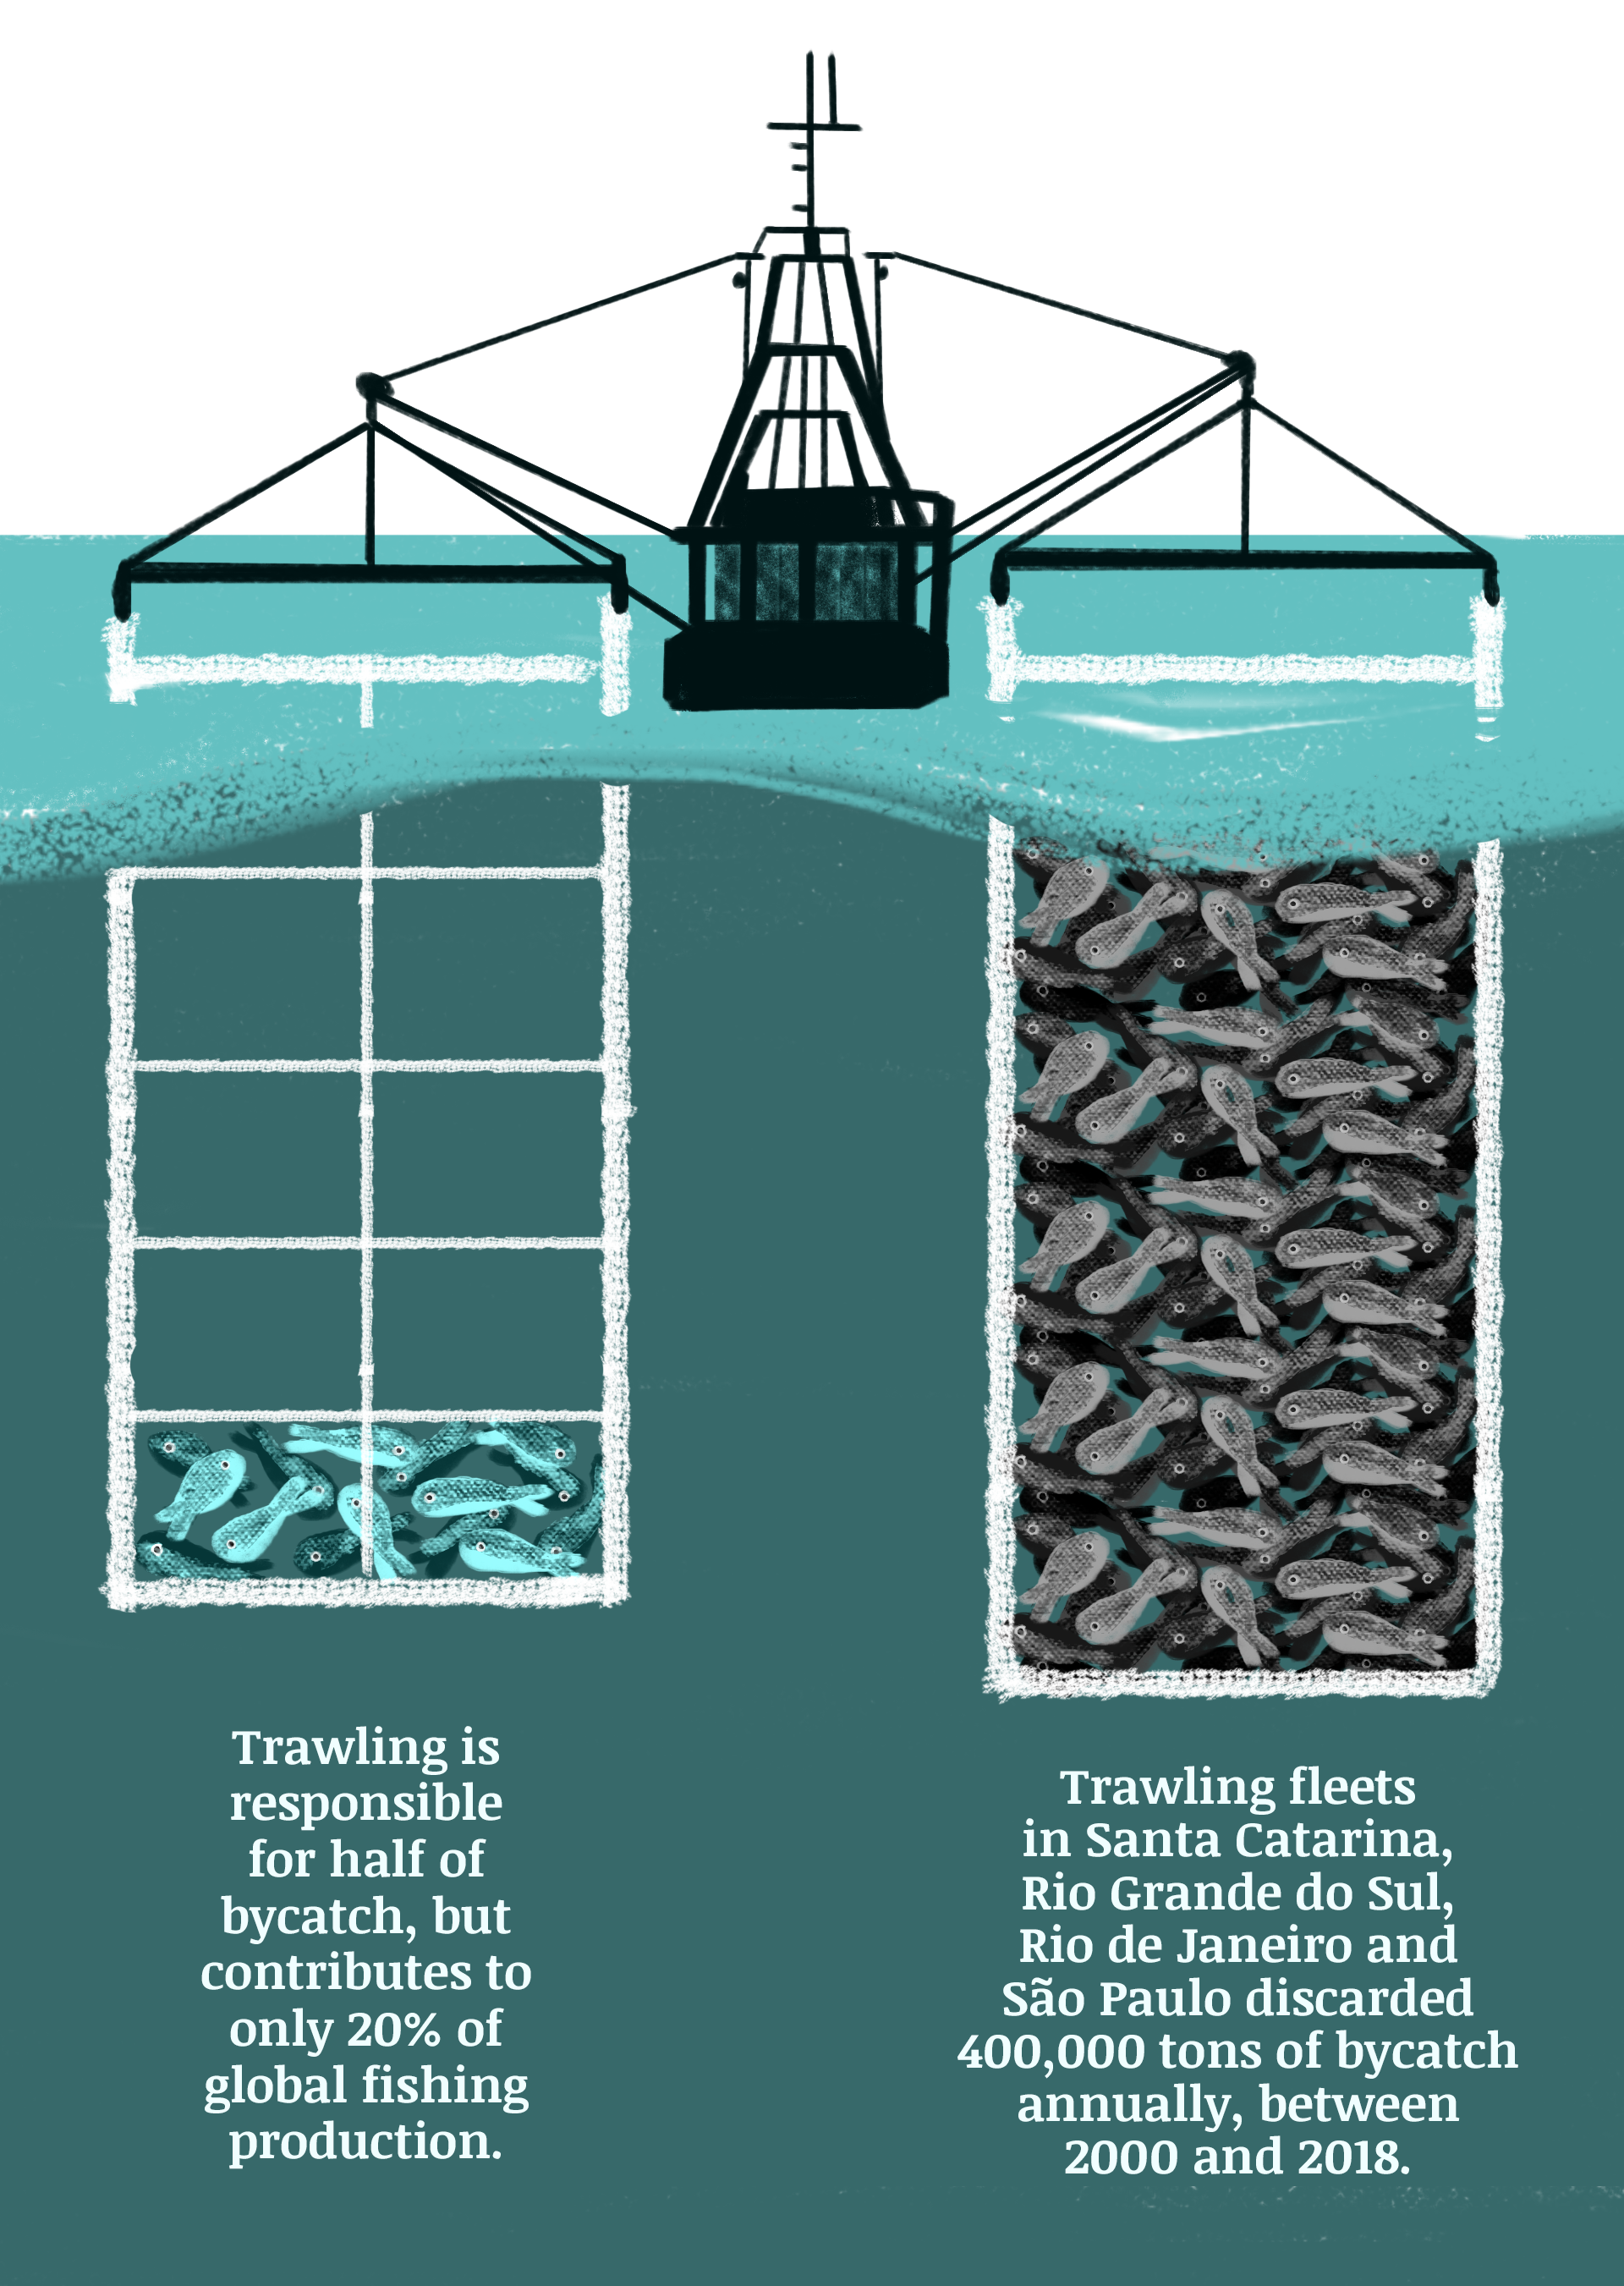 Illustration showing the bycatch caused by trawling. 